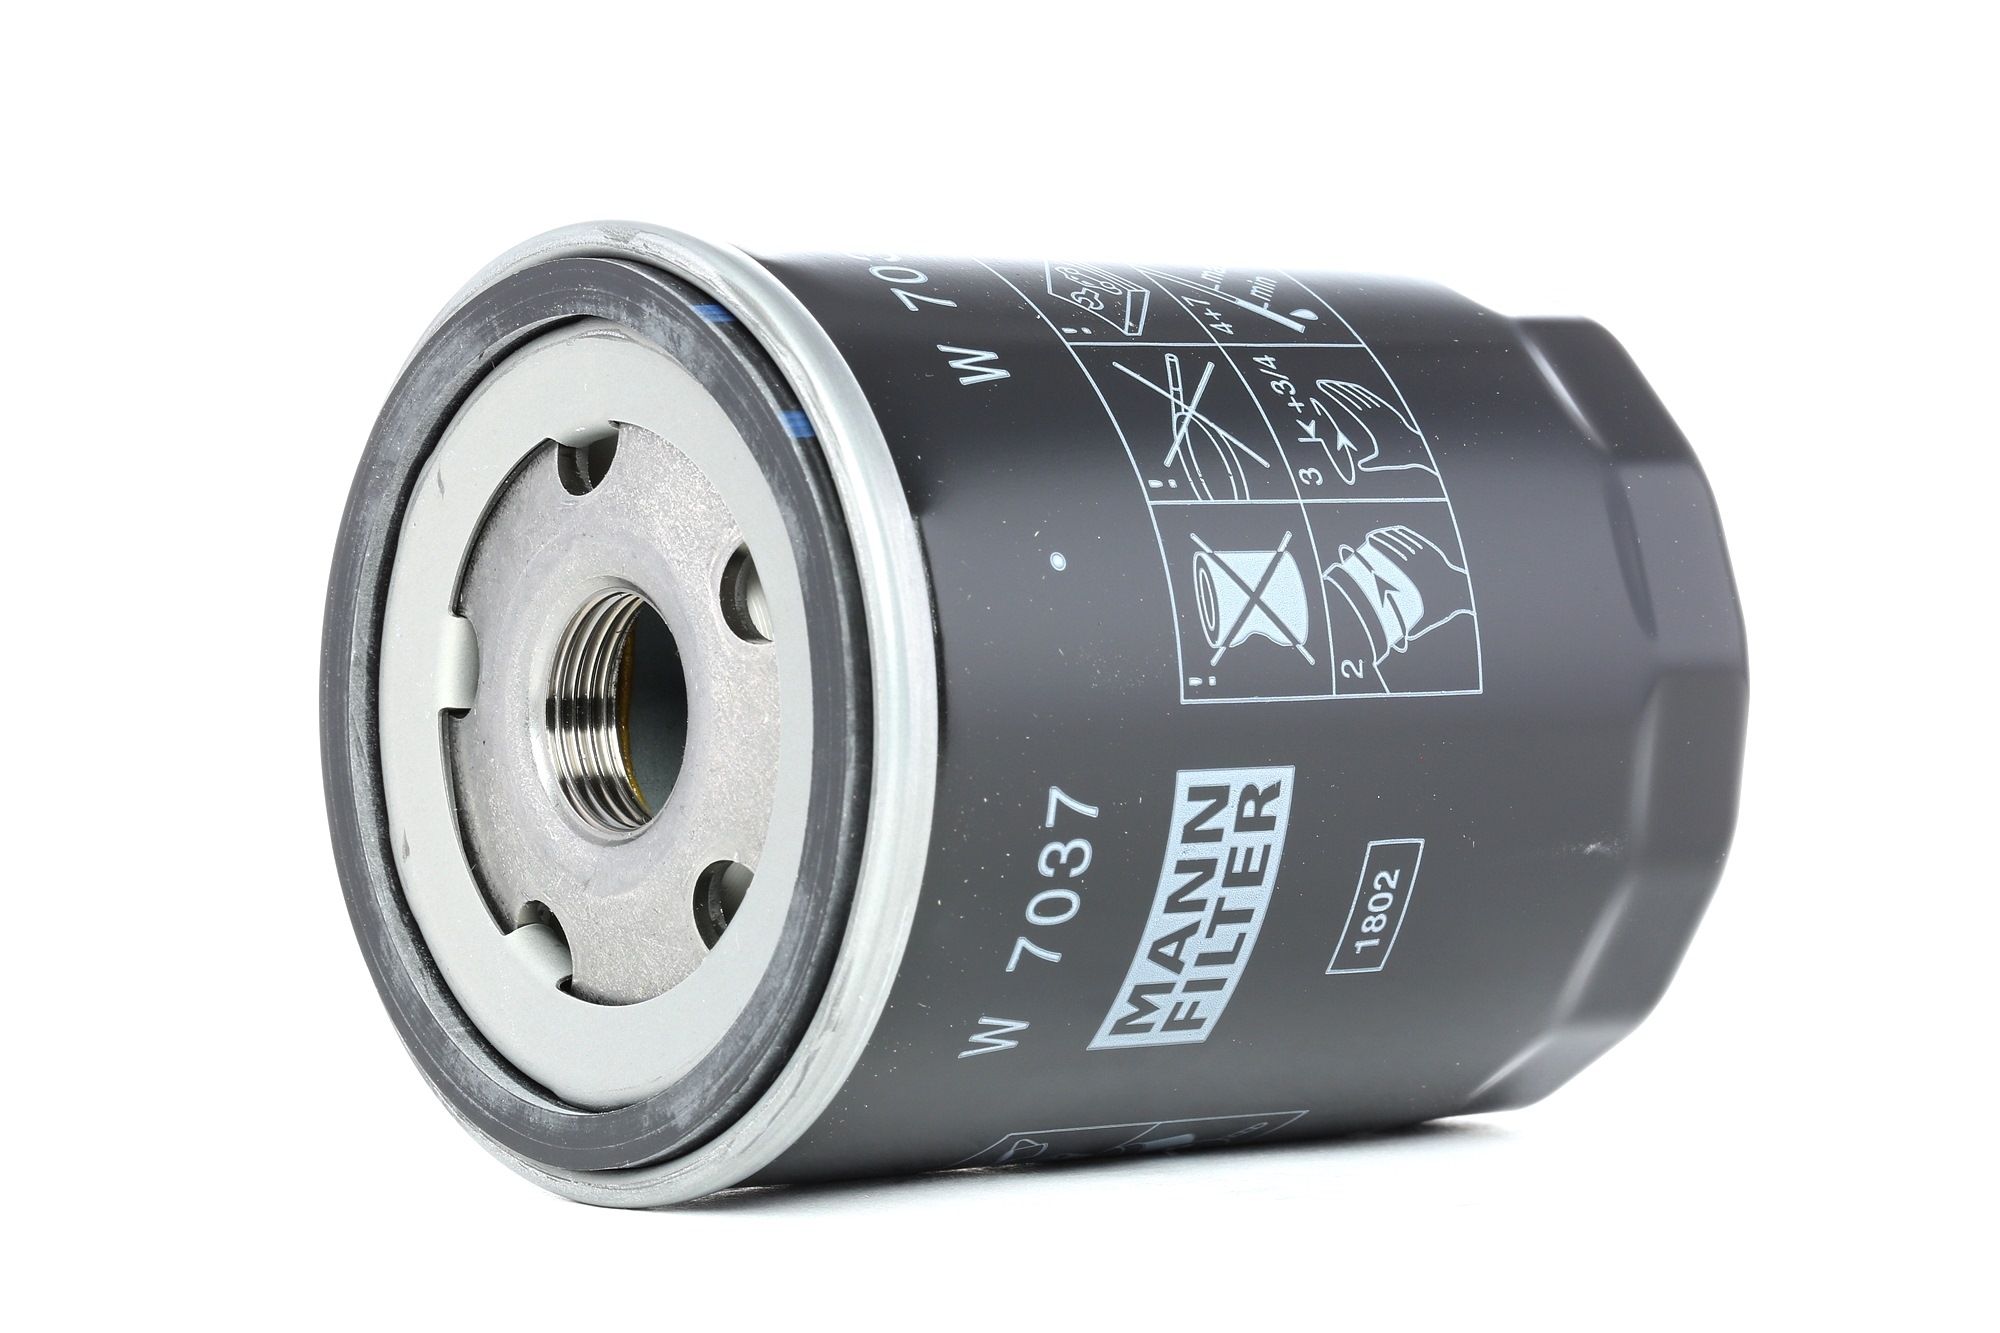 W 7037 MANN-FILTER Oil filters SUBARU M 20 X 1.5, with one anti-return valve, Spin-on Filter